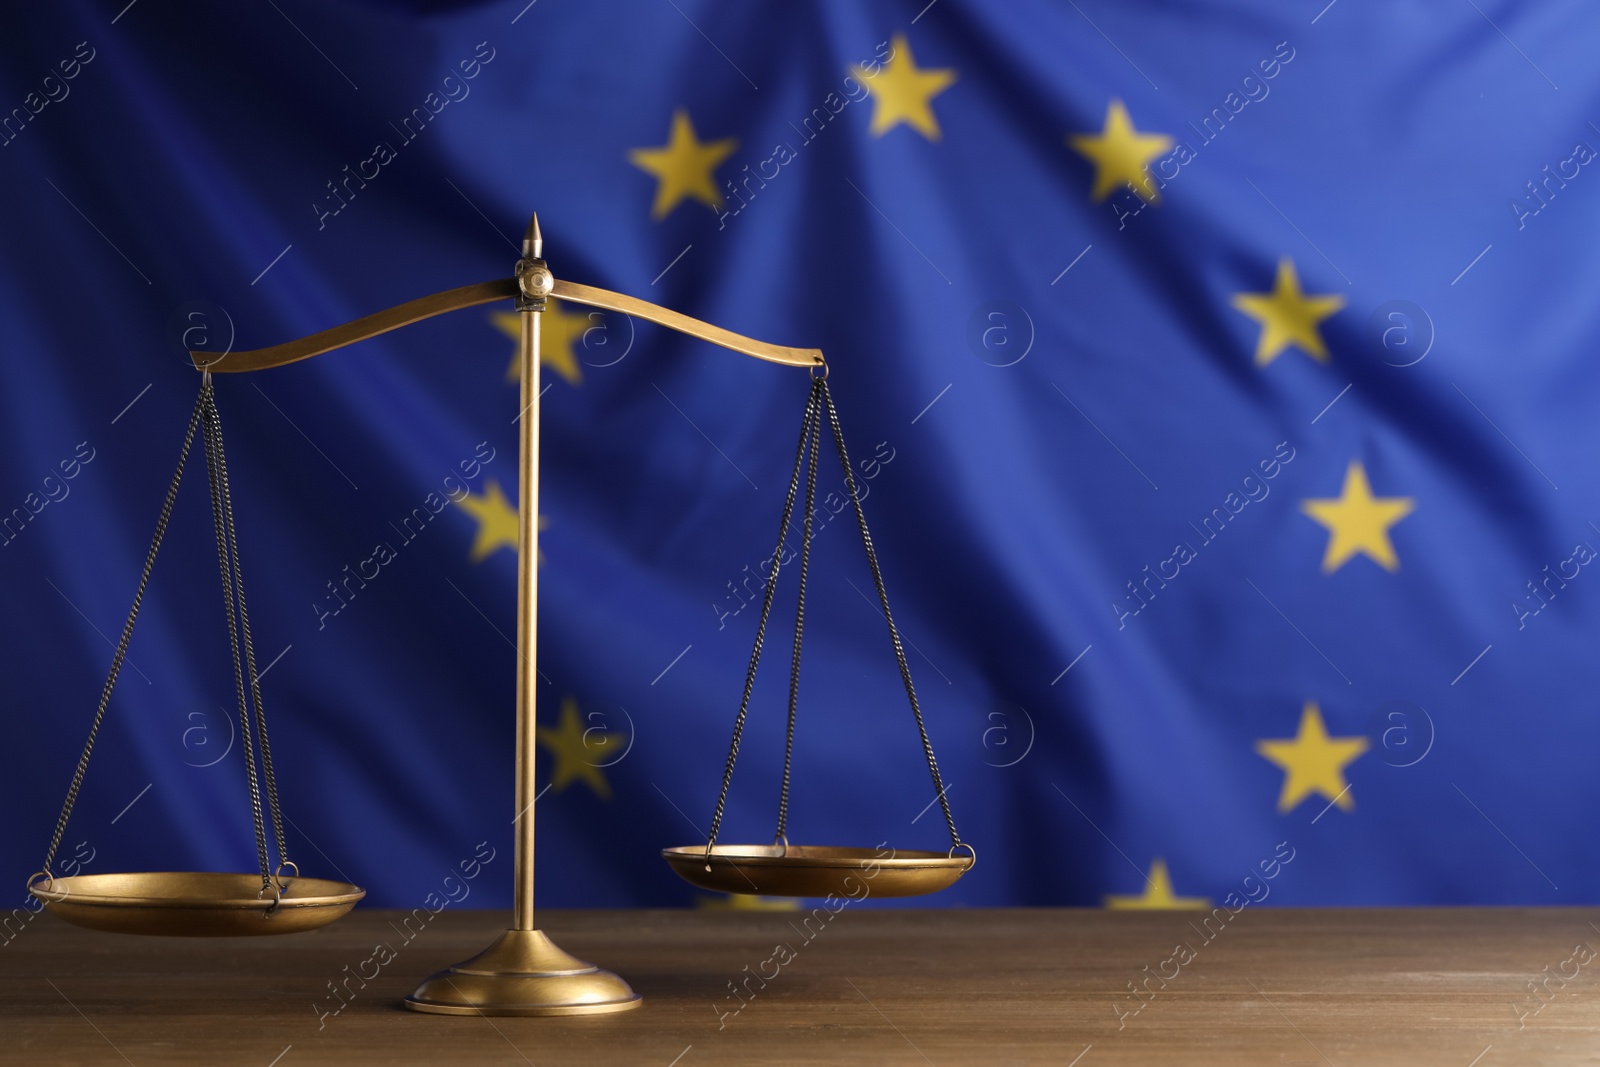 Photo of Scales of justice on wooden table against European Union flag. Space for text